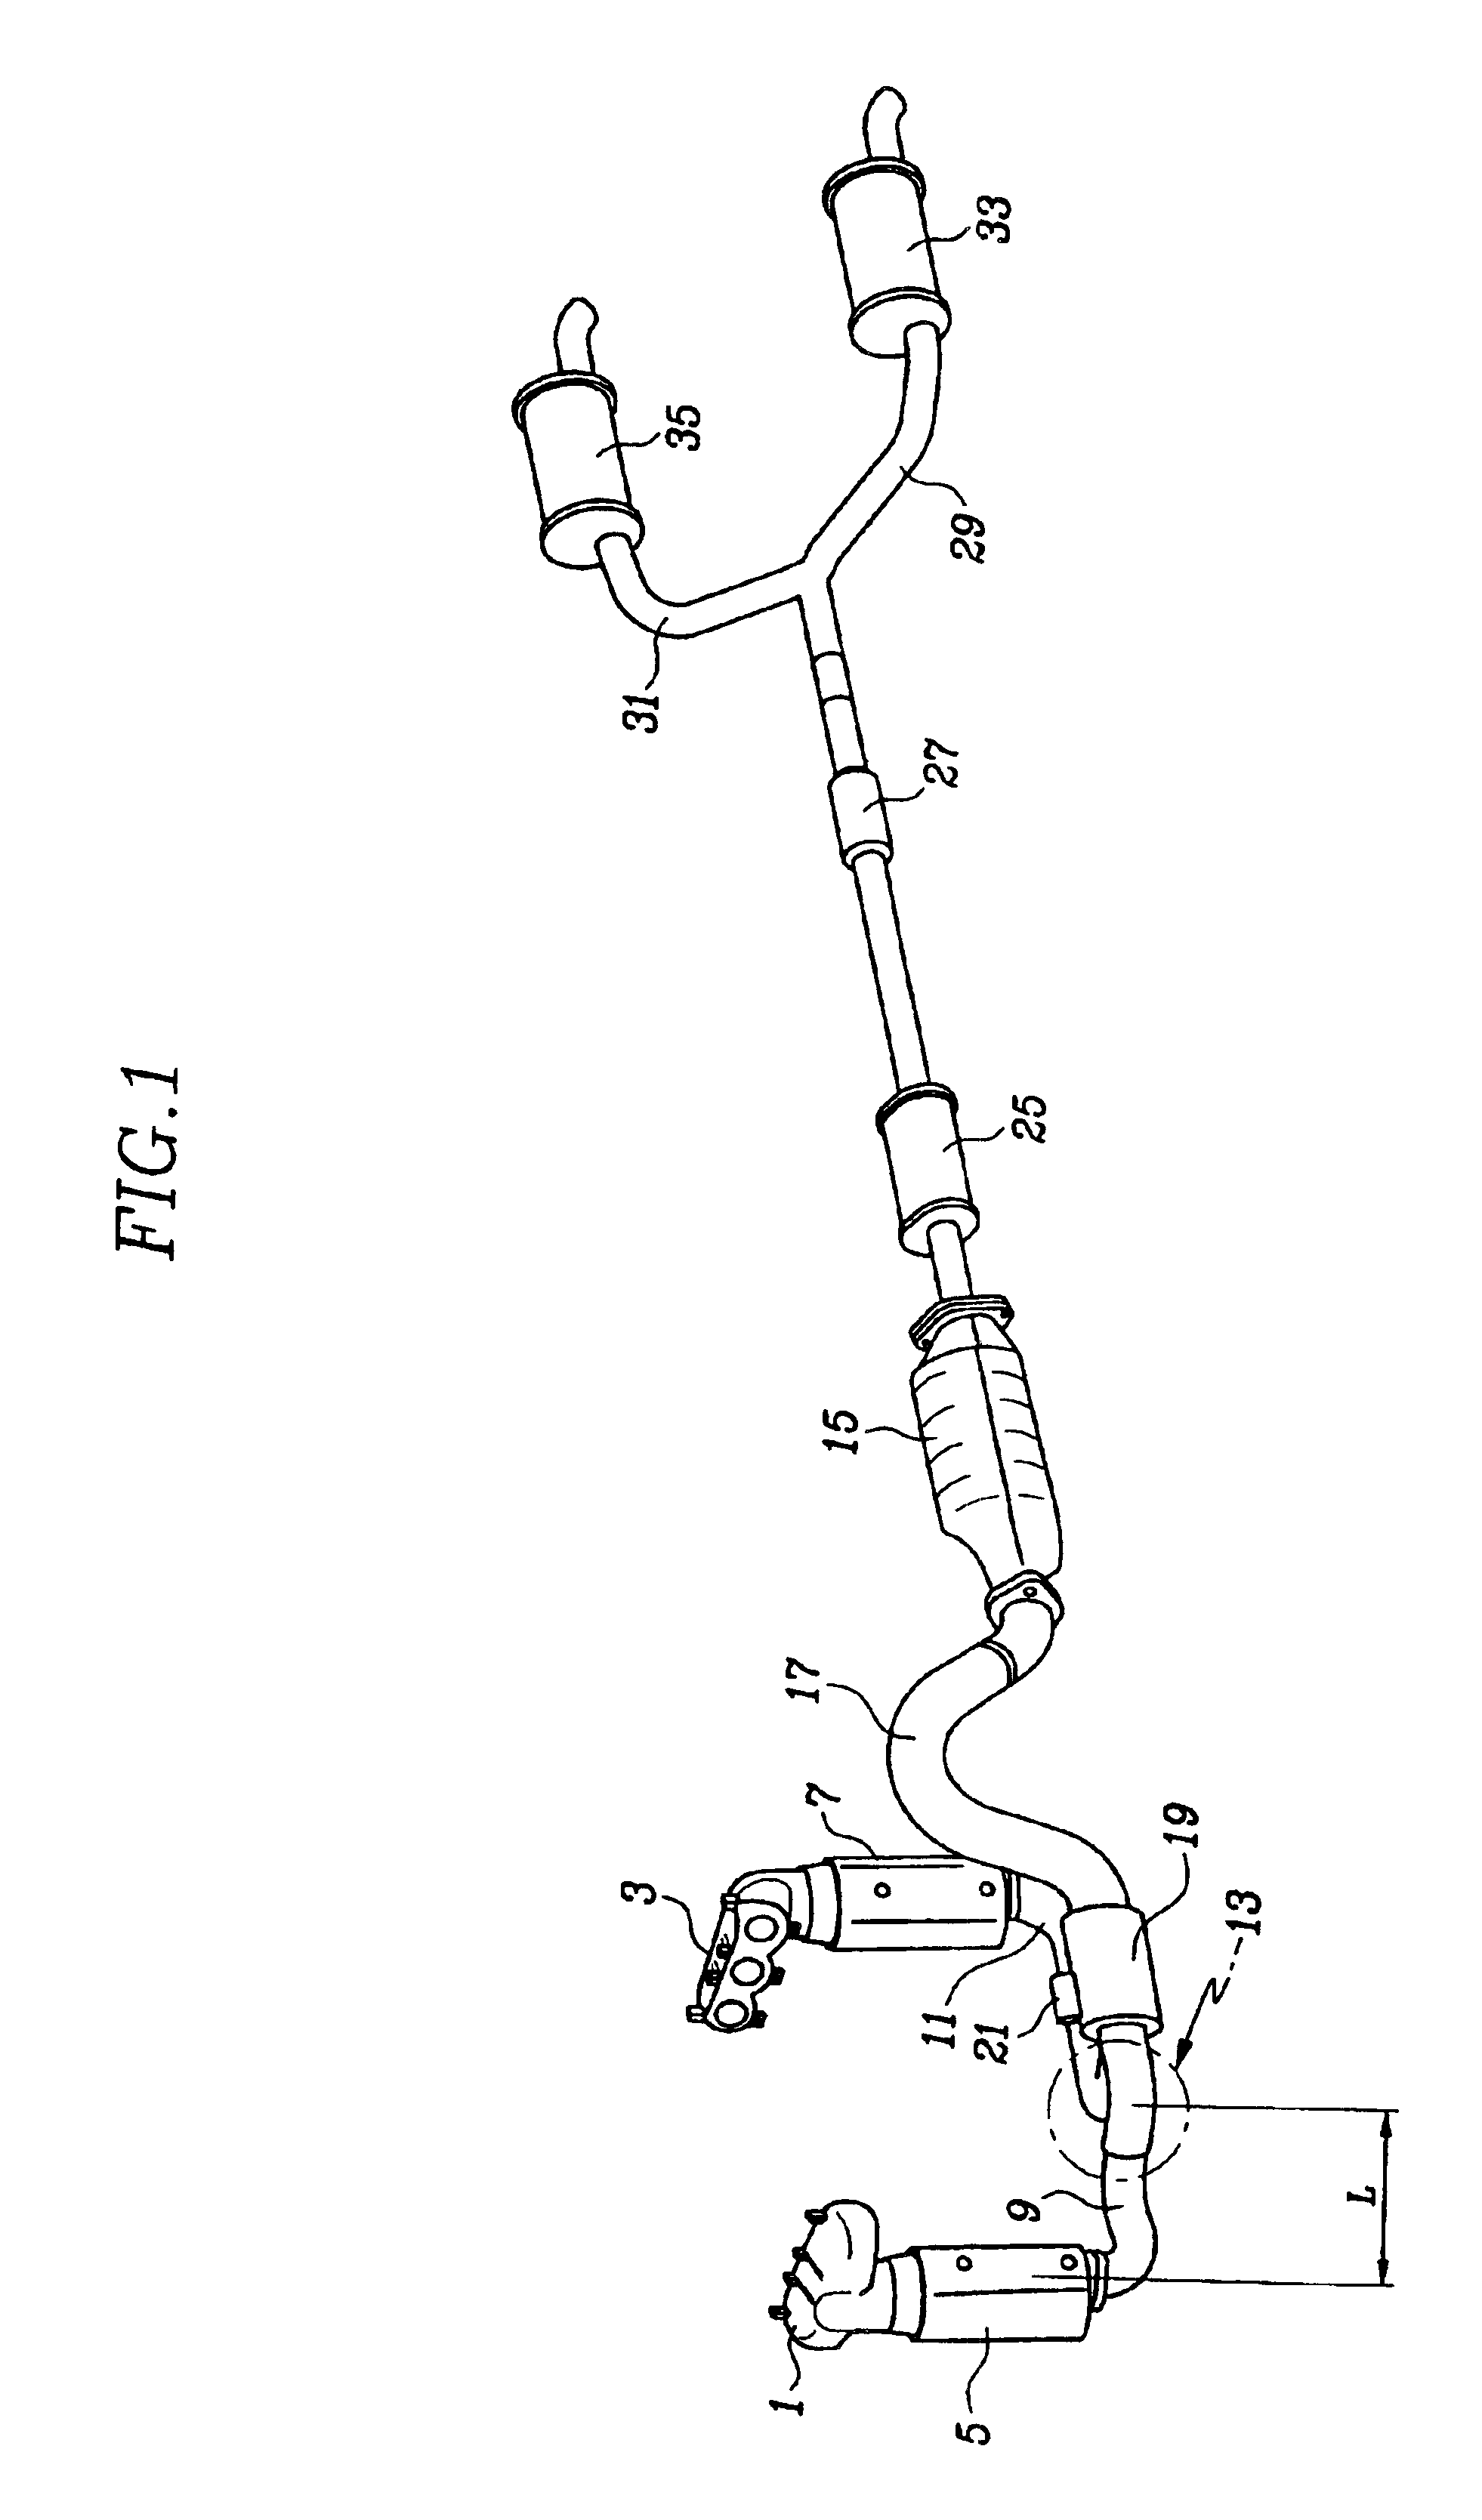 Exhaust system for a V-type engine